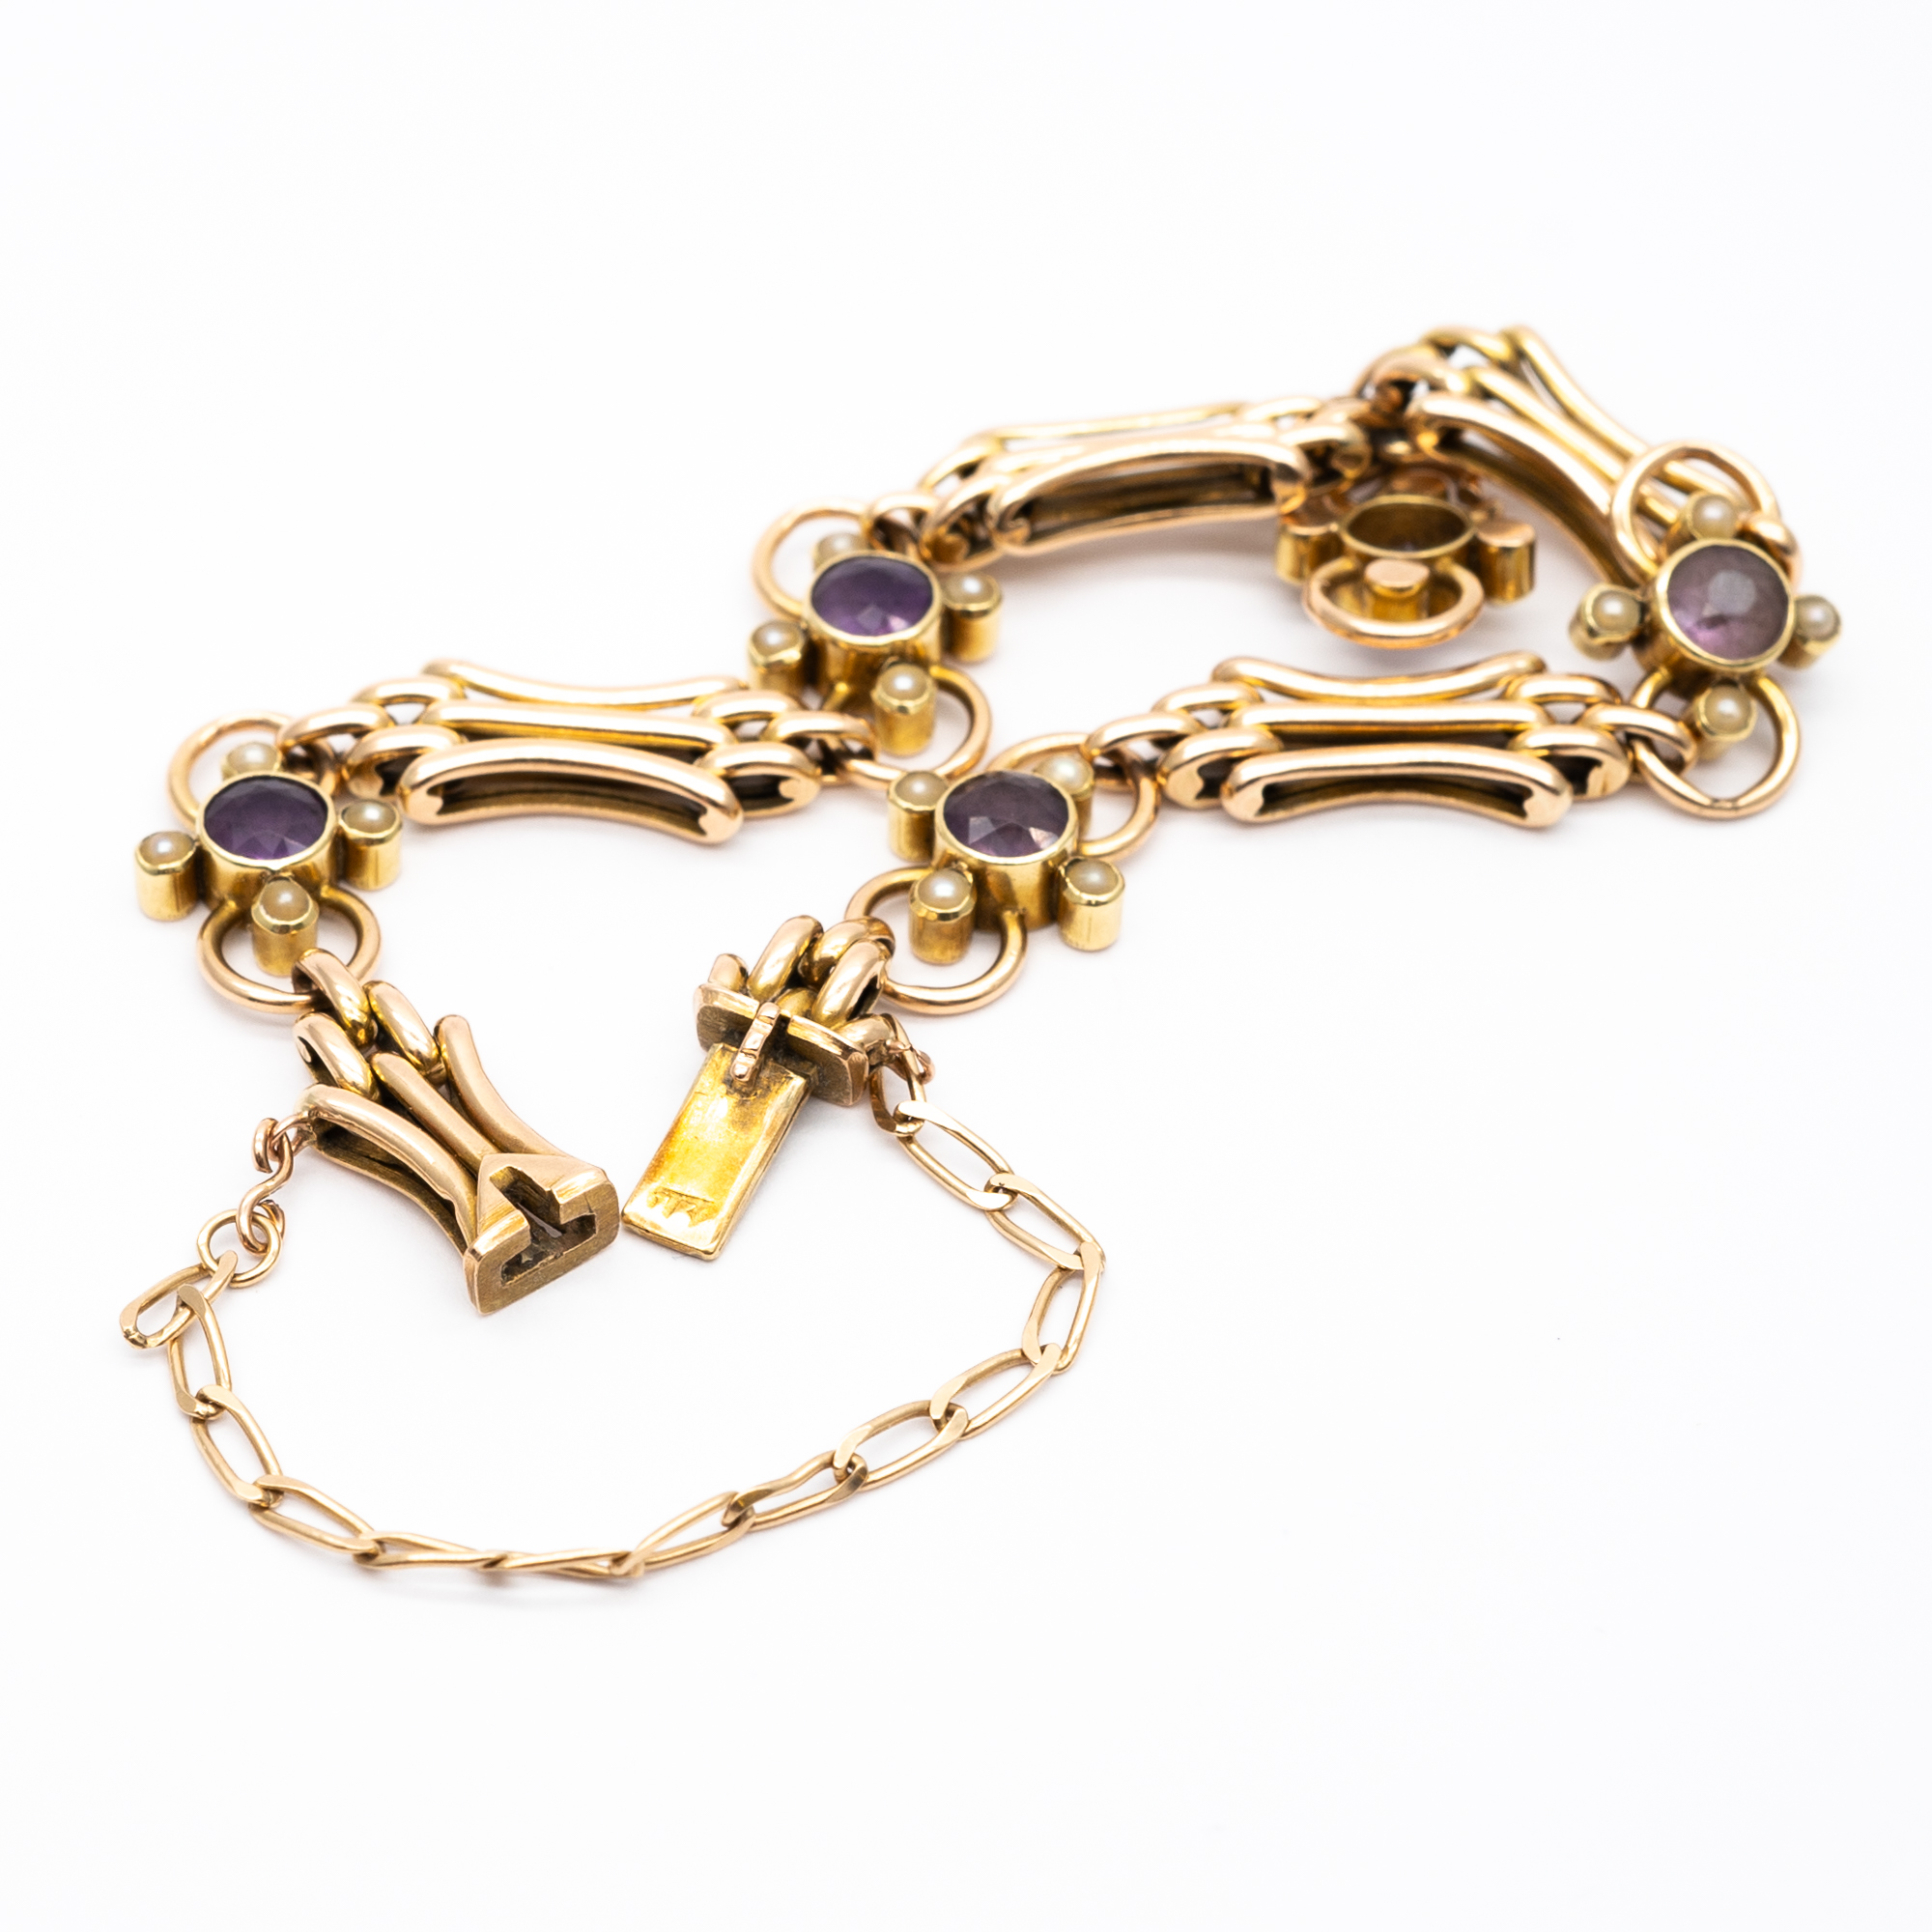 A 9ct yellow gold victorian gate bracelet - Image 2 of 4